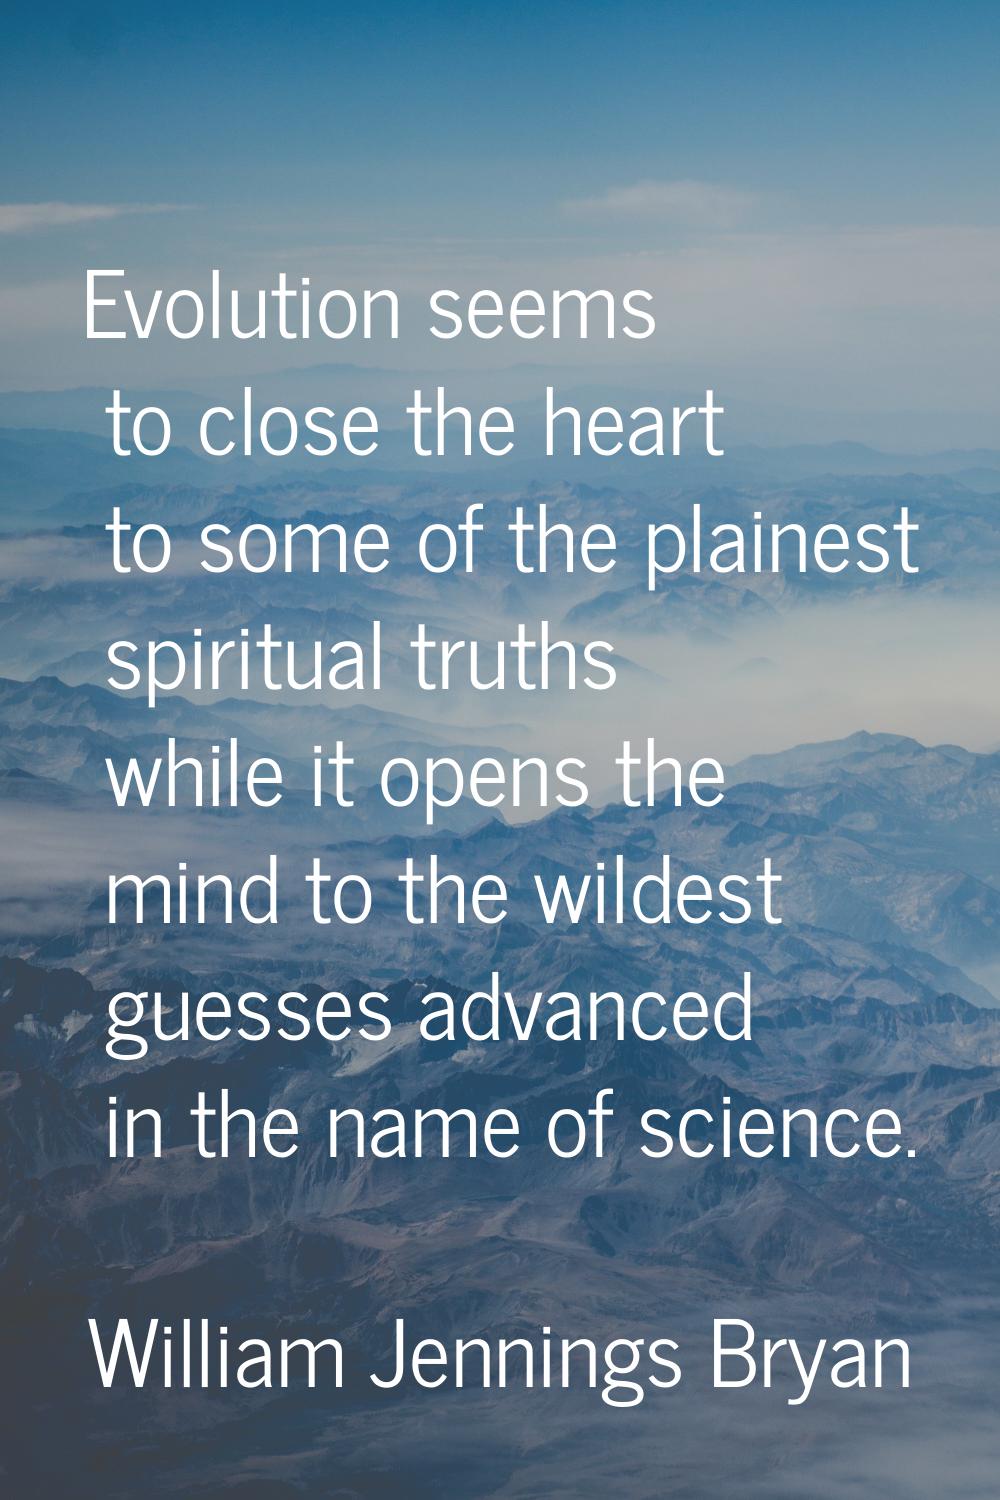 Evolution seems to close the heart to some of the plainest spiritual truths while it opens the mind